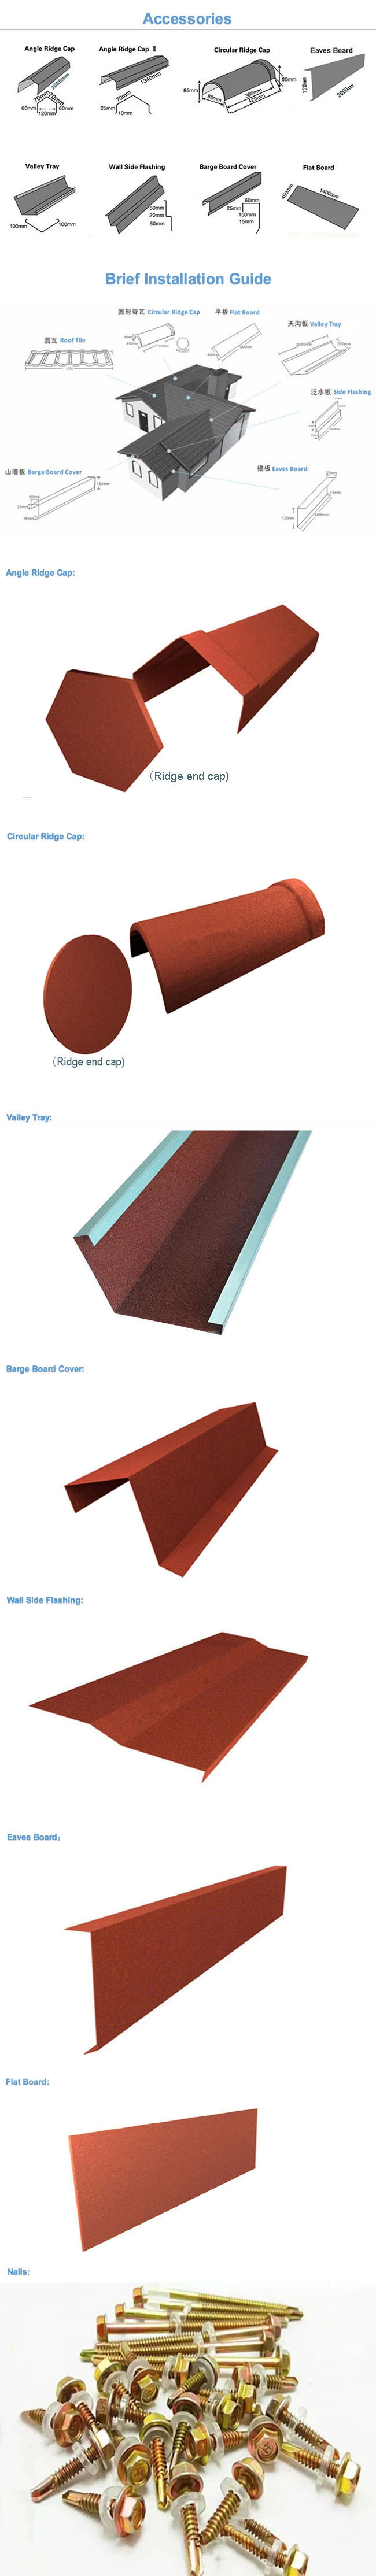 Roofing Tile Facial Board Main Accessories End Cover Eaves Board